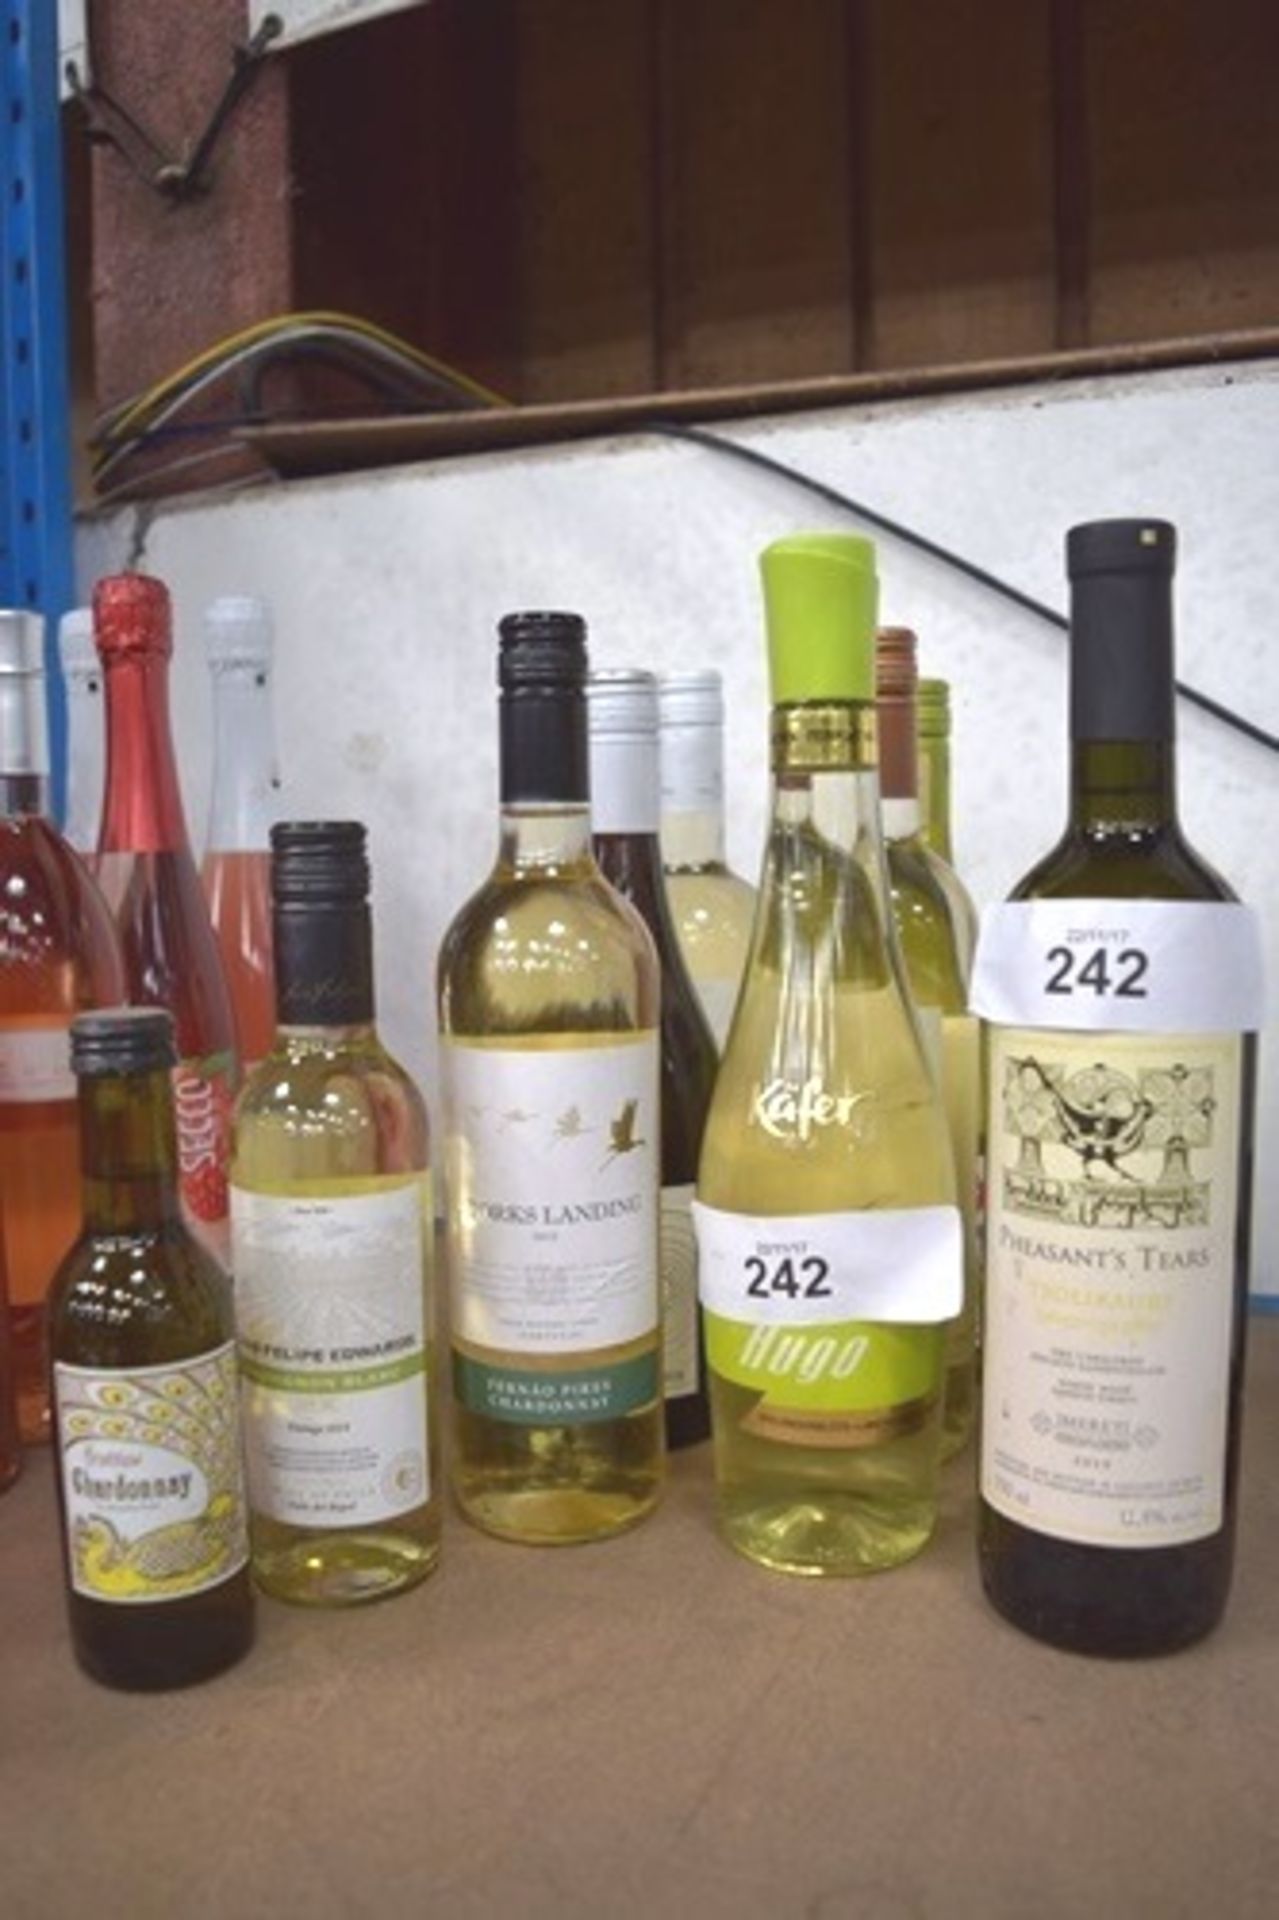 7 x various bottles of New World wine including 5 x bottles of Chilean, 1 x 37.5cl bottle of Luis